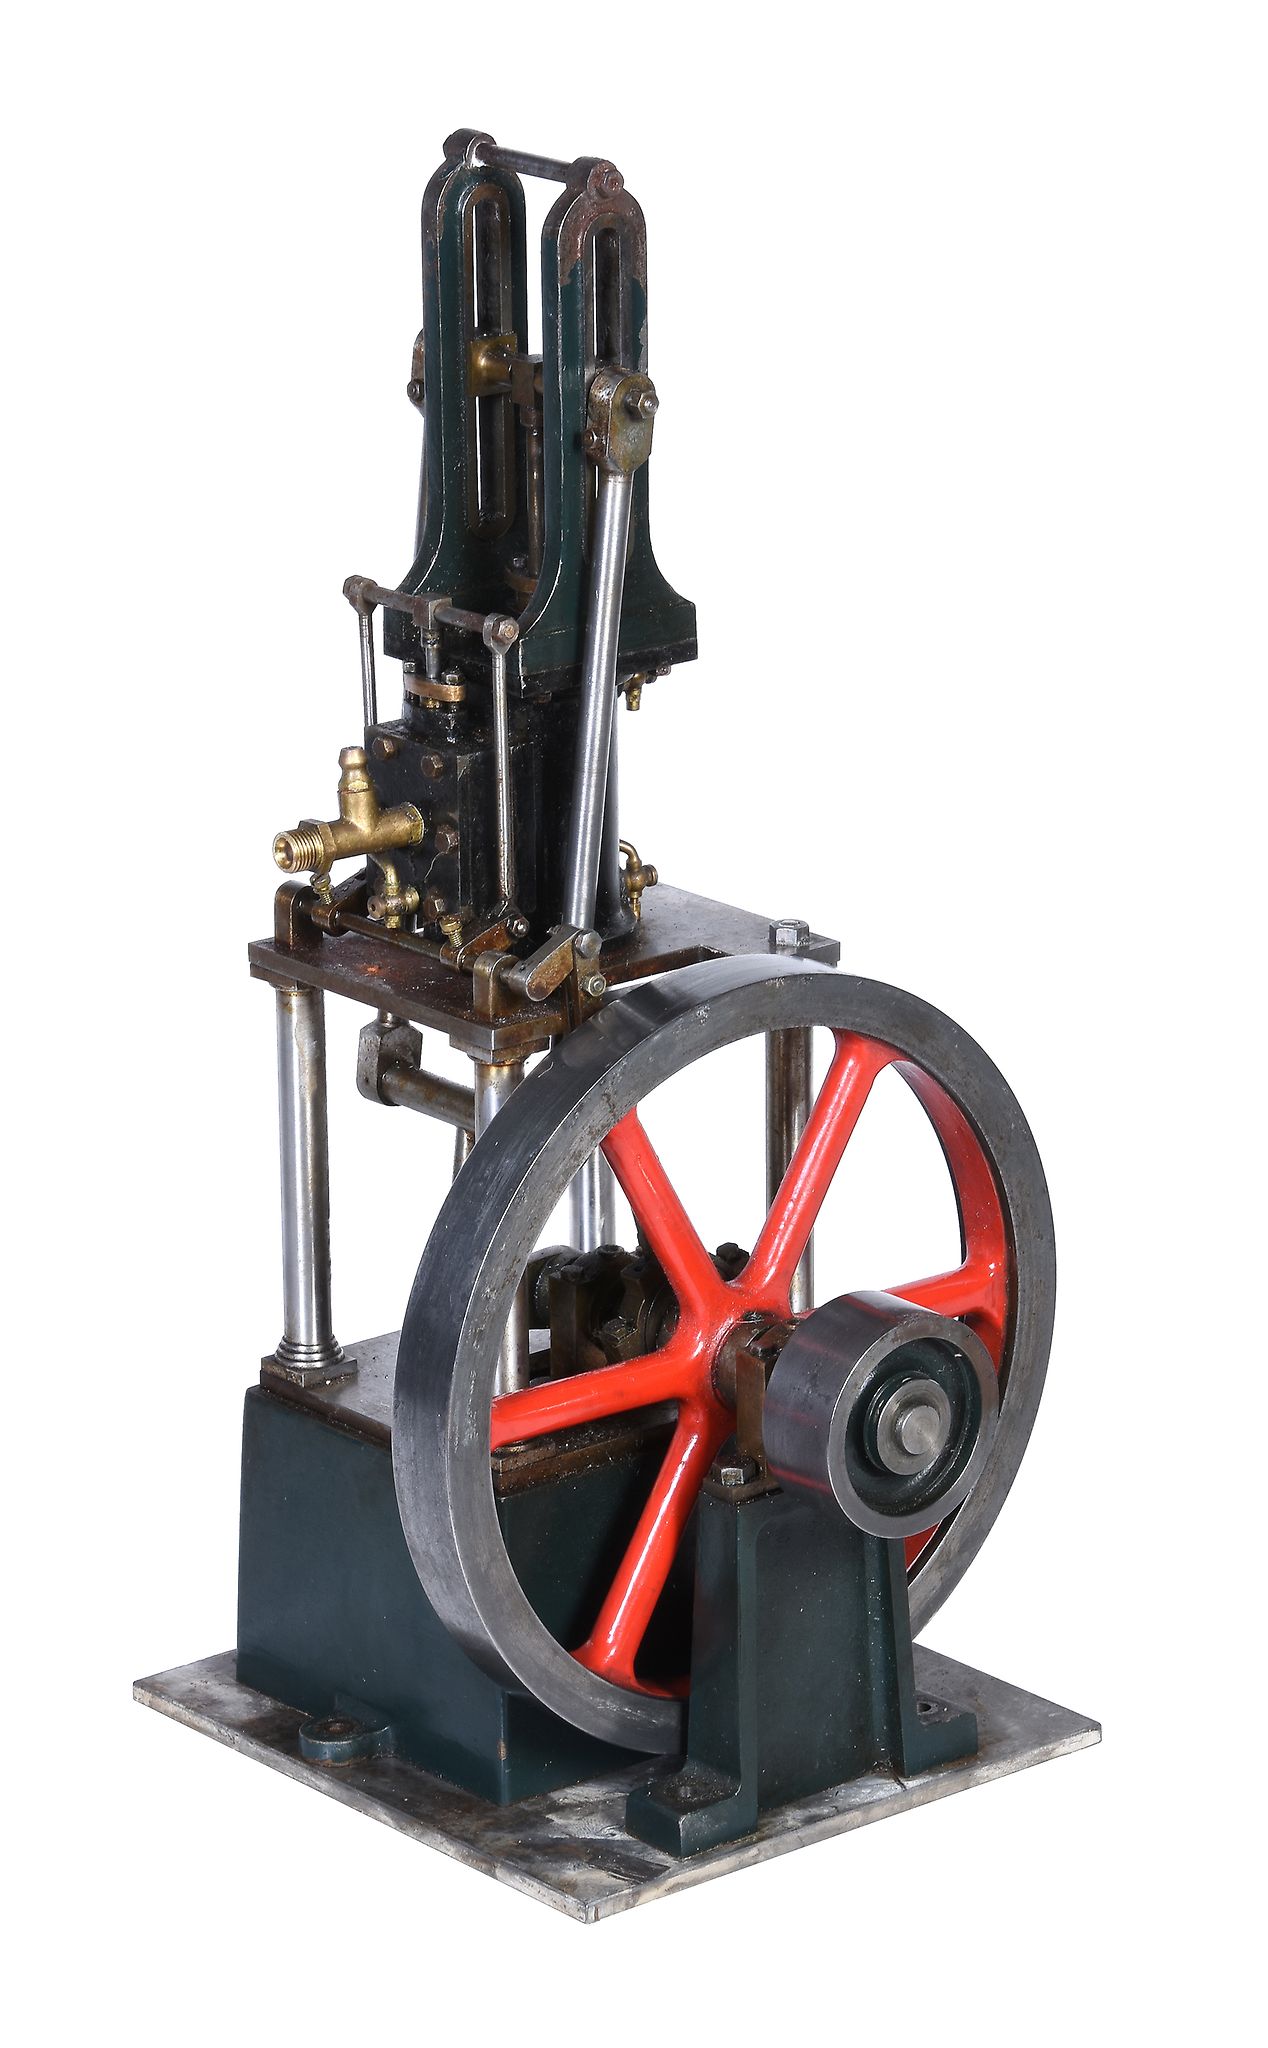 A well engineered model of a Stuart Turner James Coombe Table engine, built by Mr L.H Watling in